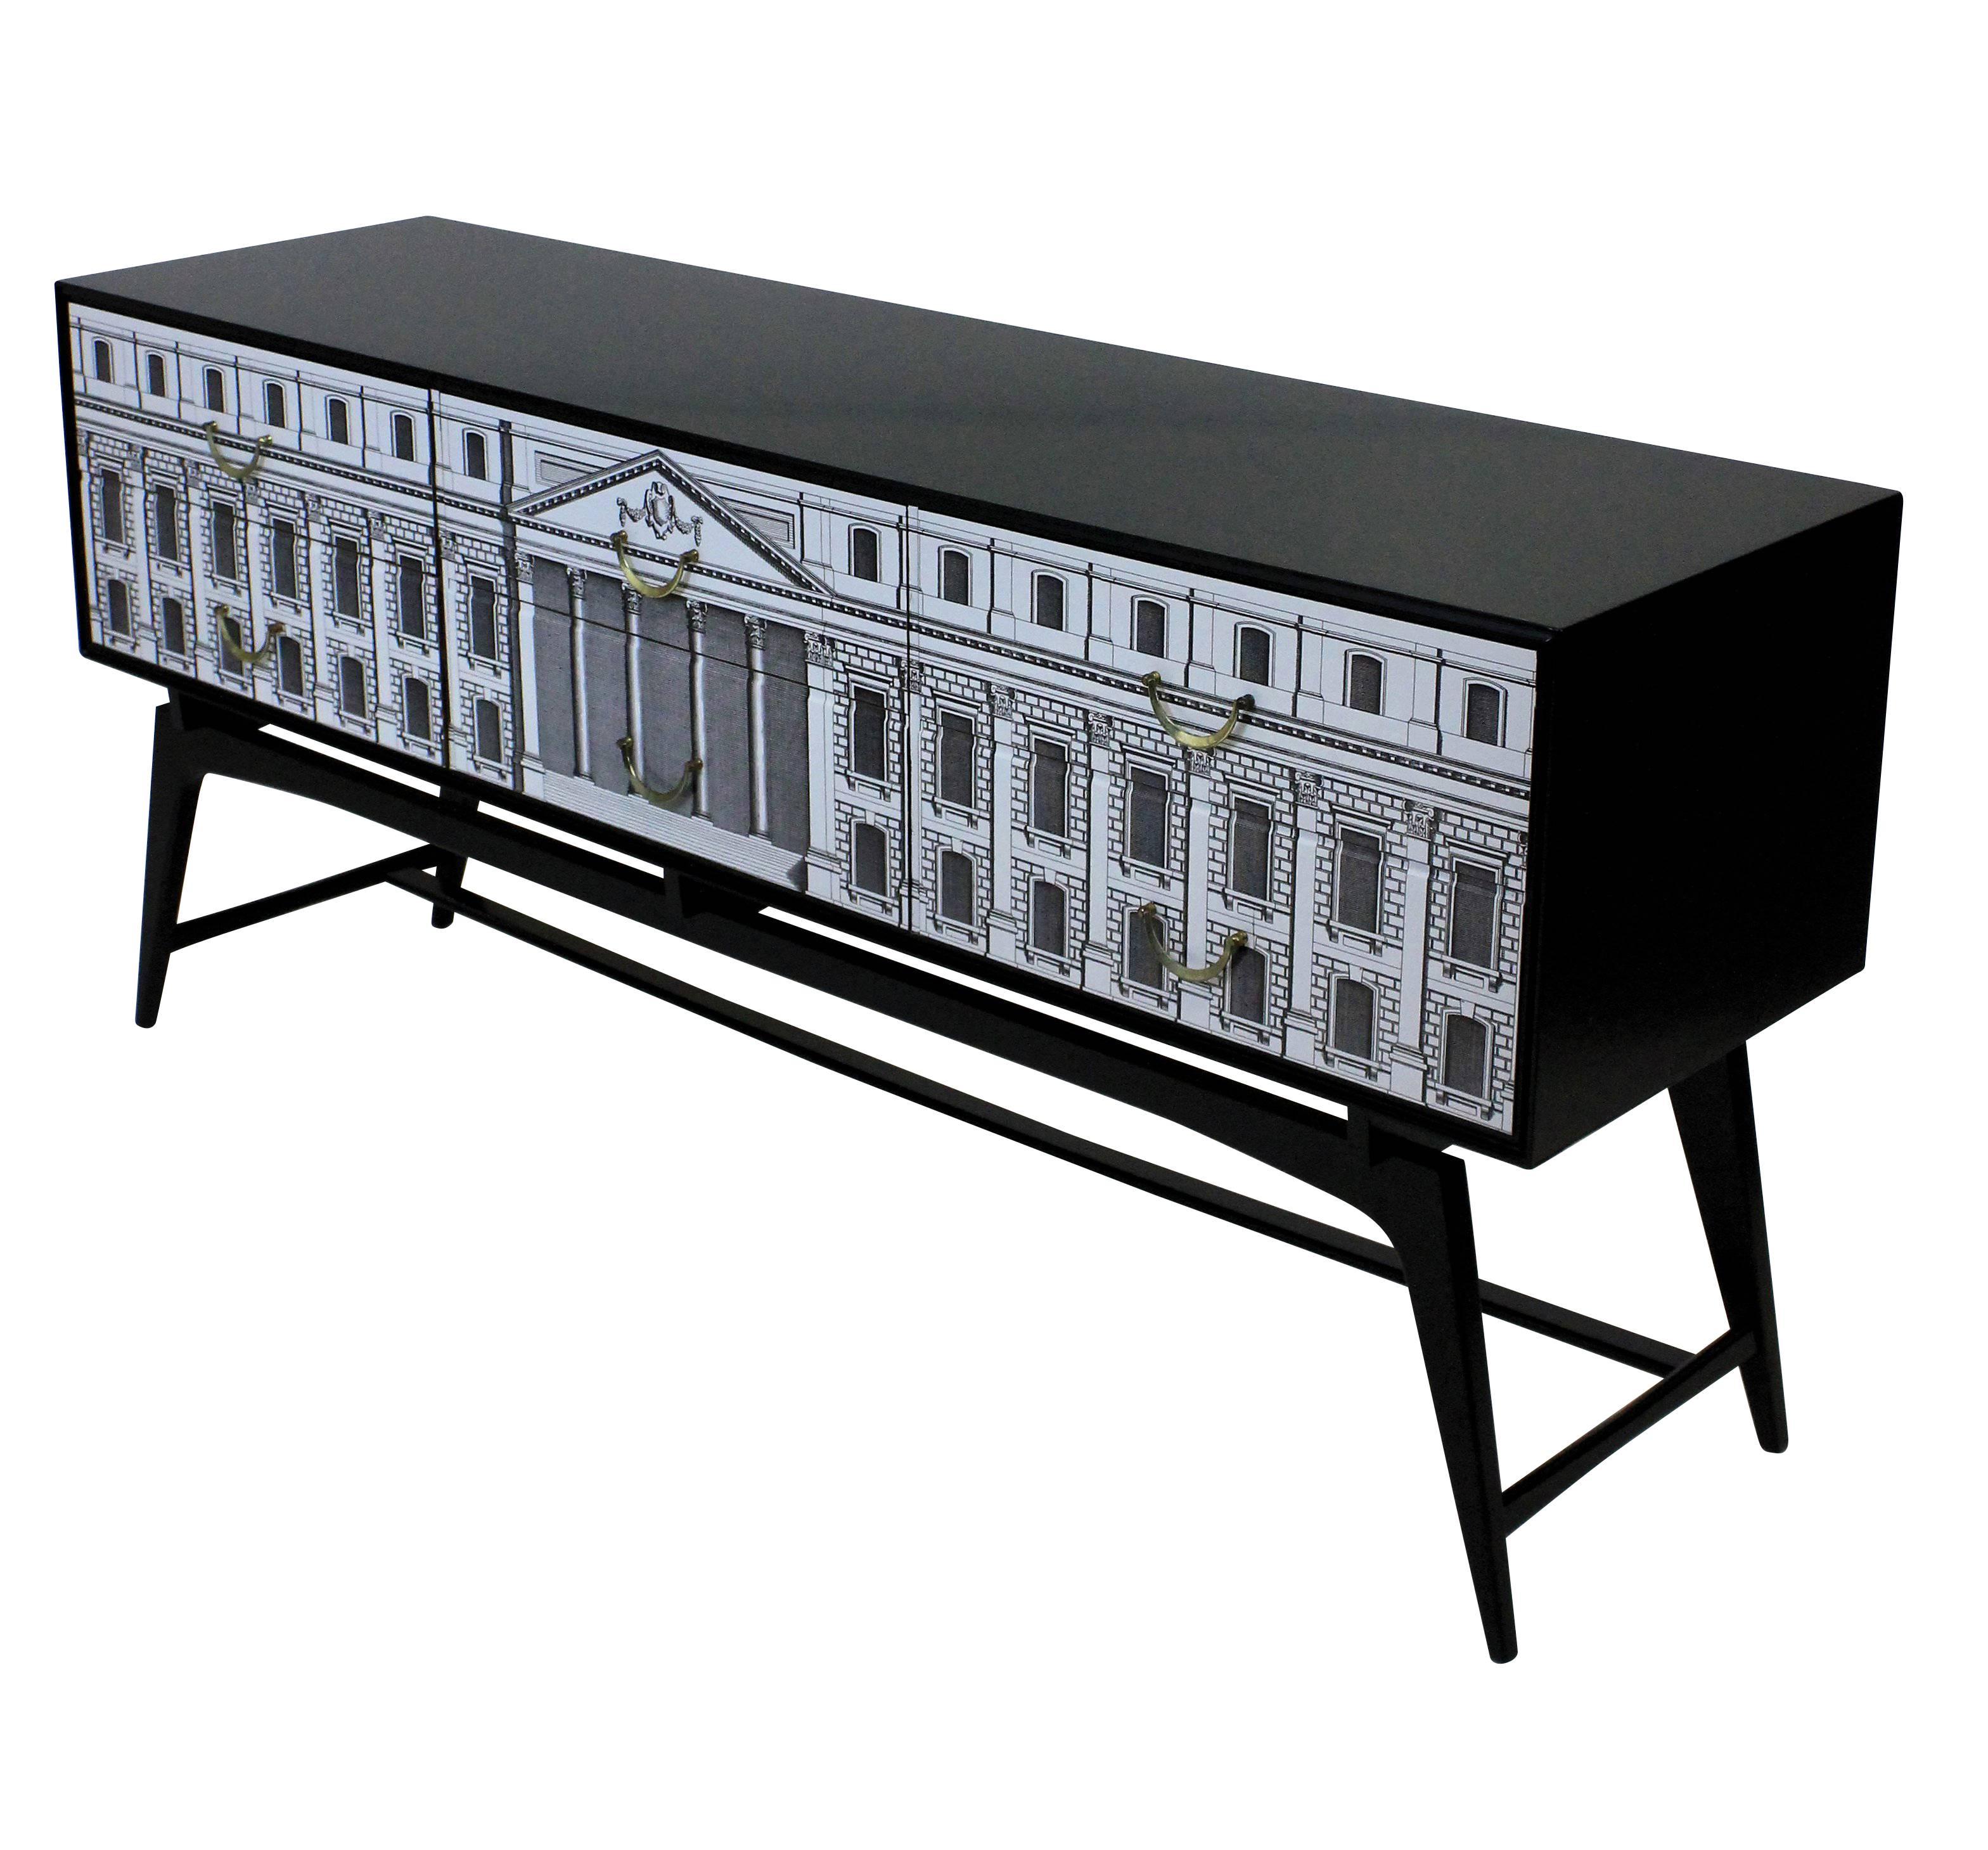 An English Fornasetti style credenza in black lacquer, with Neo-Classically inspired decoration. Six drawers with brass fittings.

        